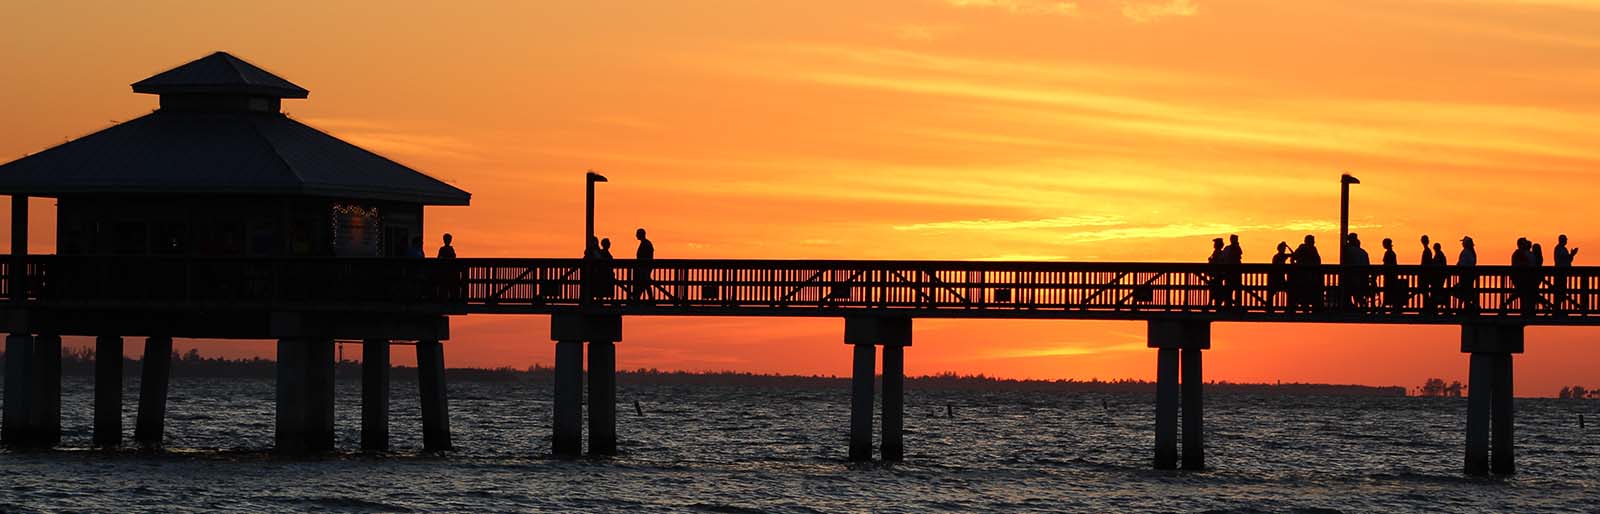 Fort Myers dock at sunset - Florida managed IT services